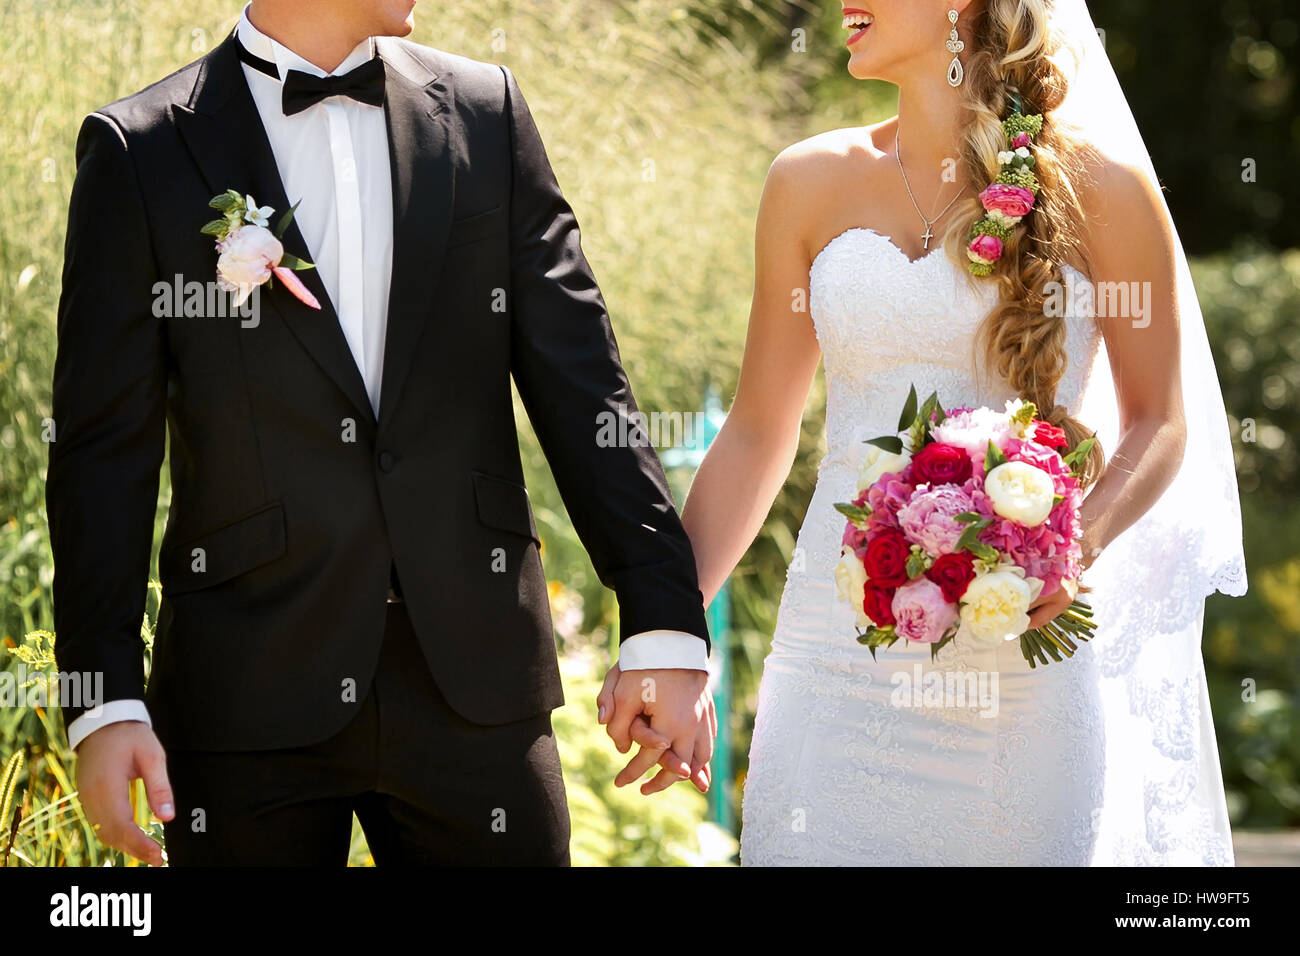 Young wedding couple. Groom and bride together. Stock Photo